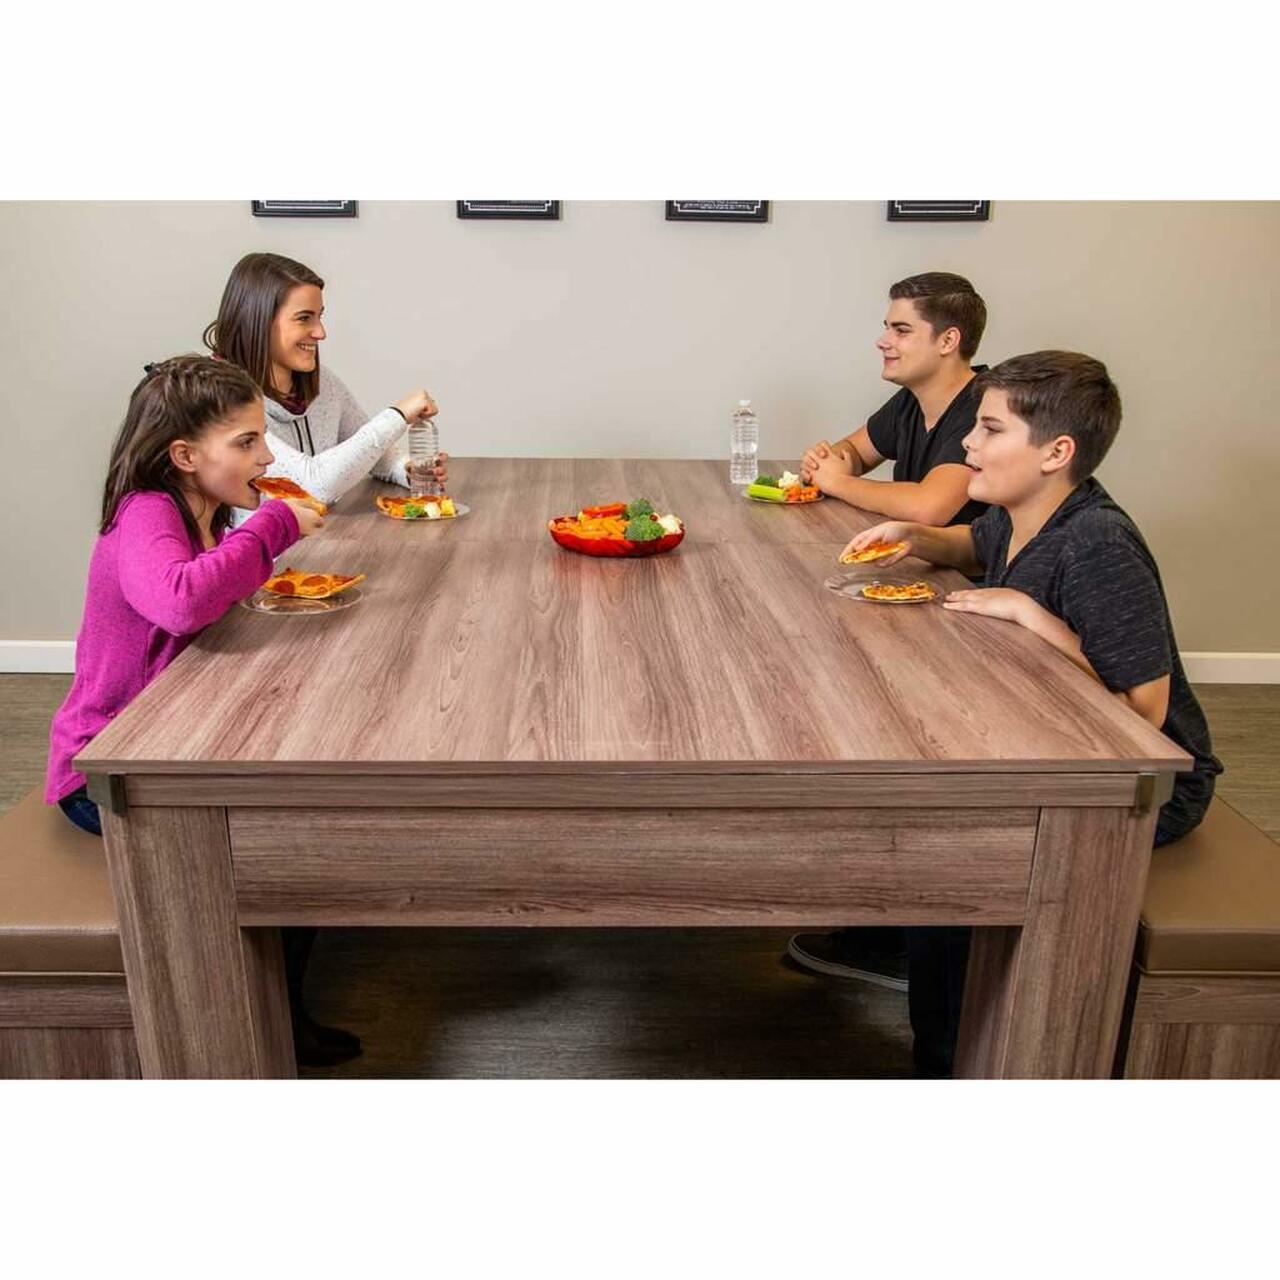 Dining Table Or Gaming Table? Find The Finest Air Hockey Dining Table Models On The Market